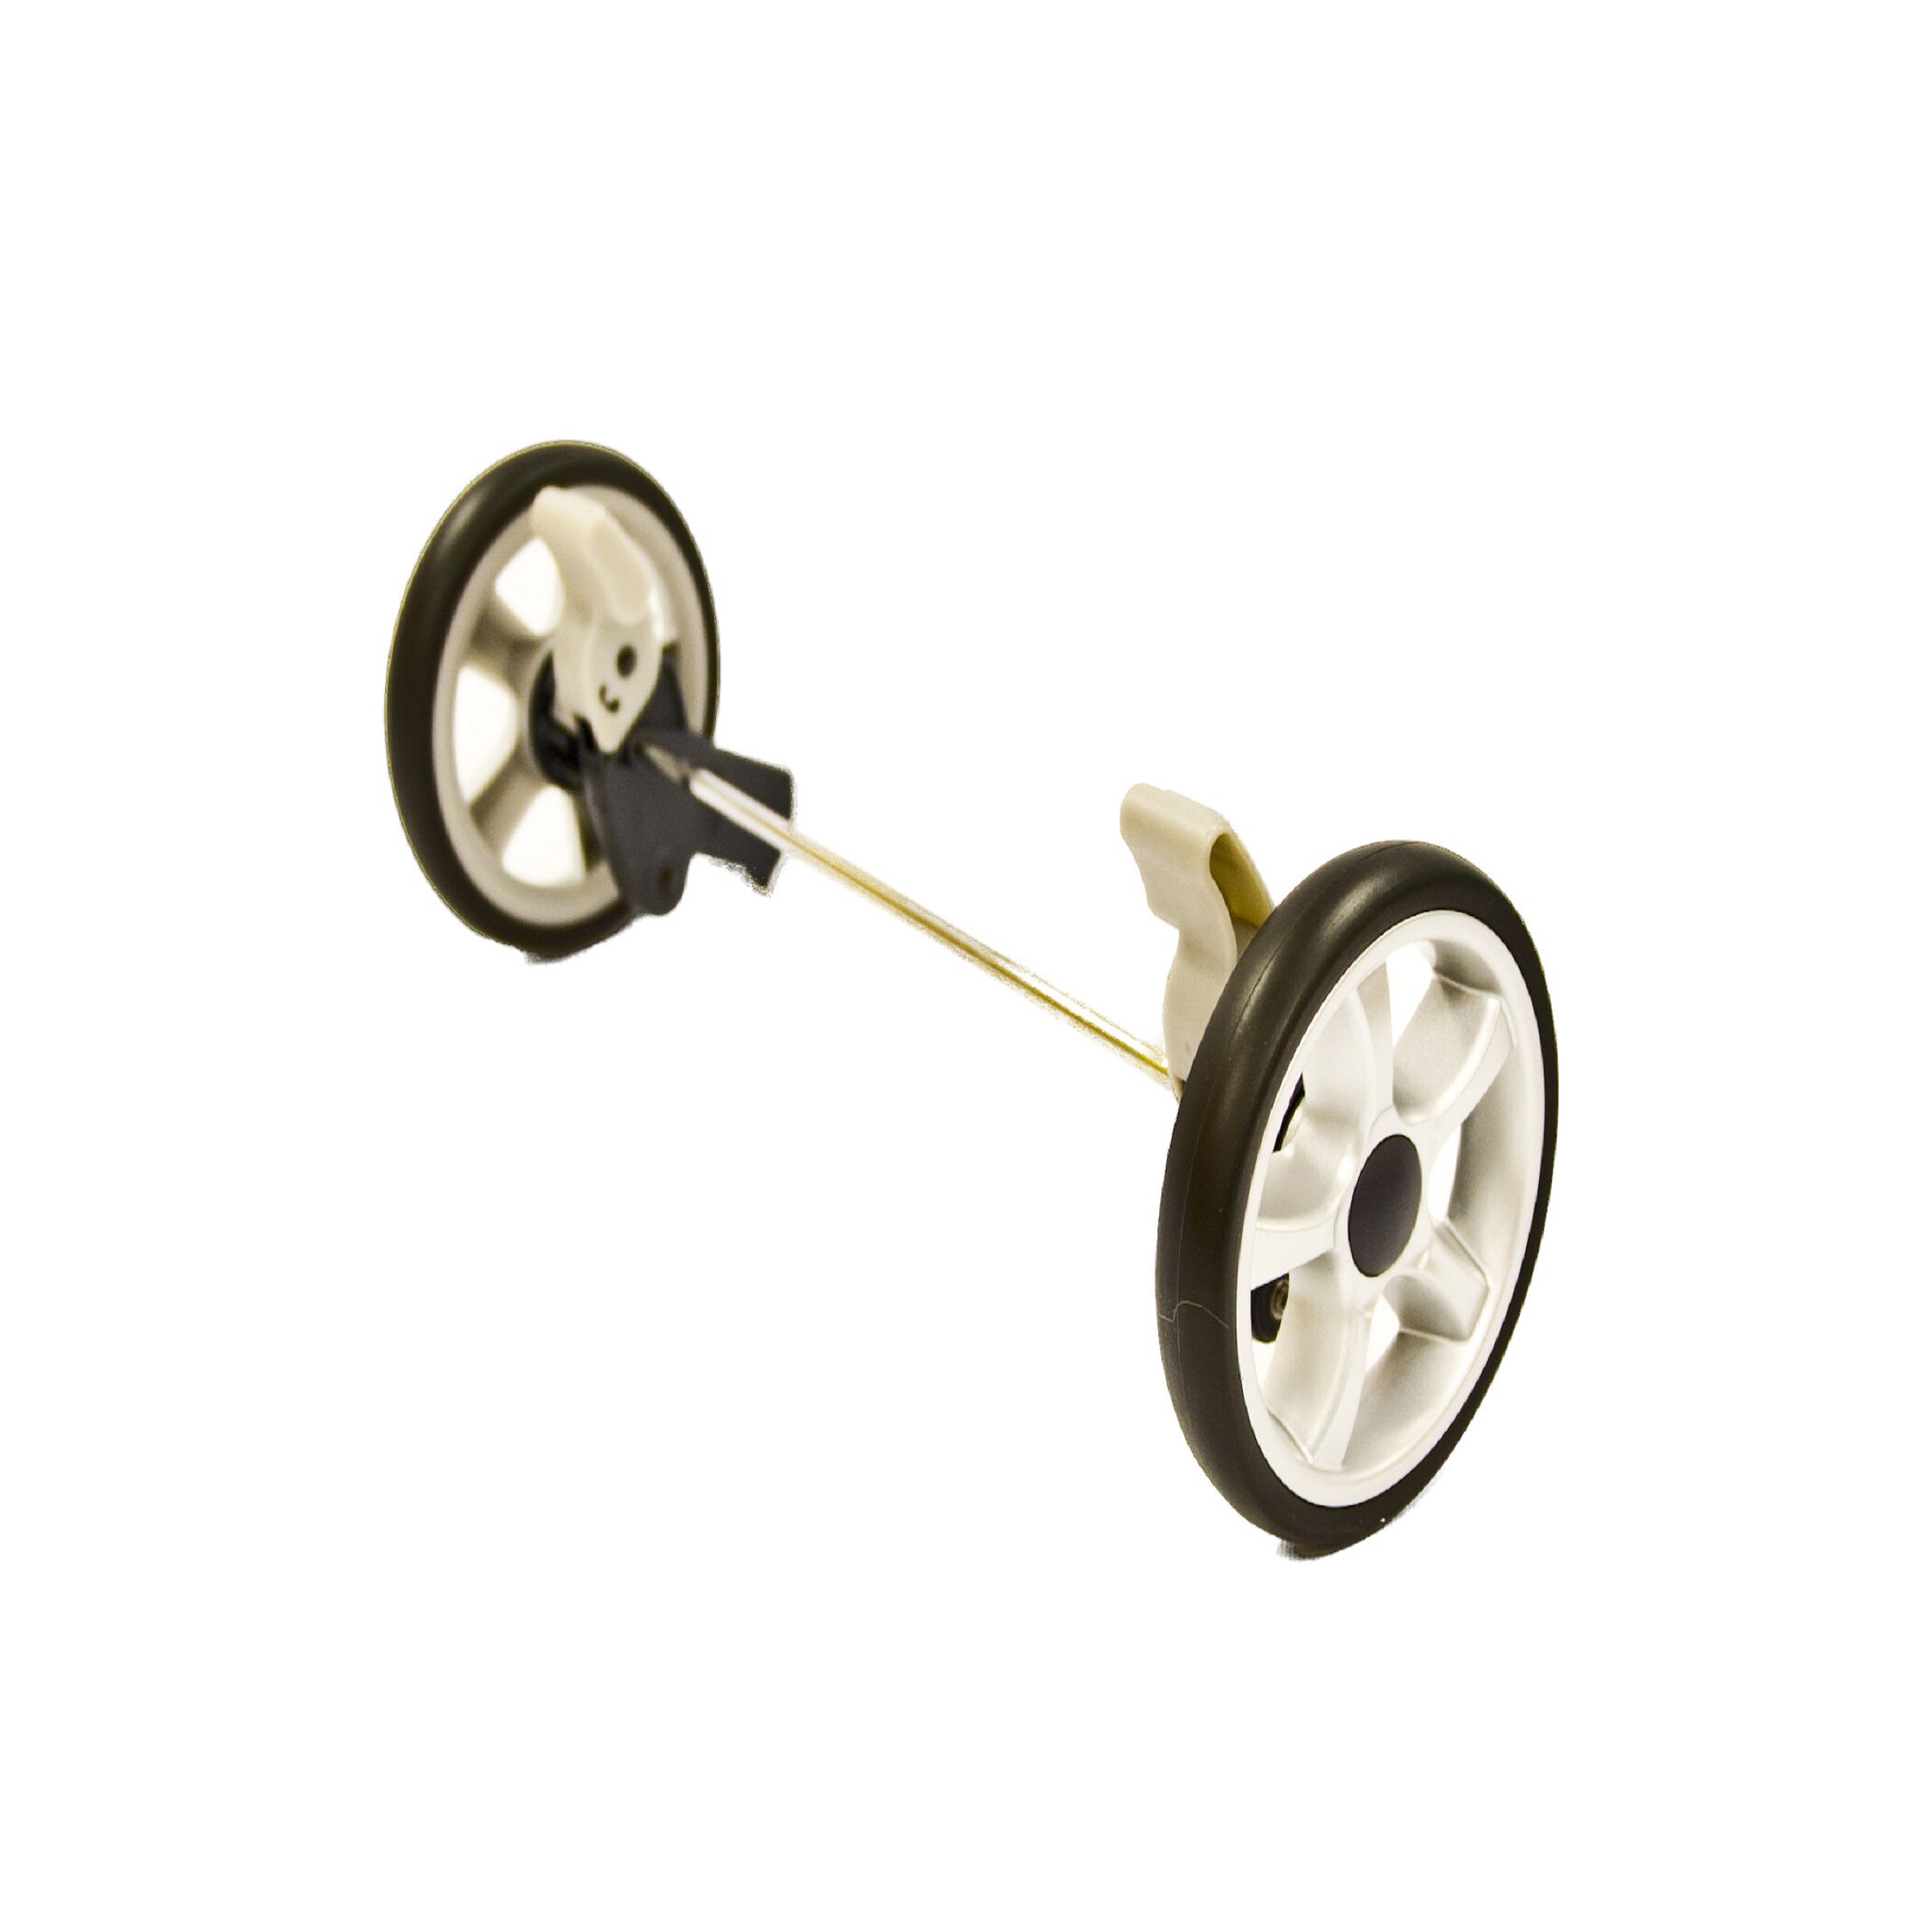 chicco liteway wheel replacement